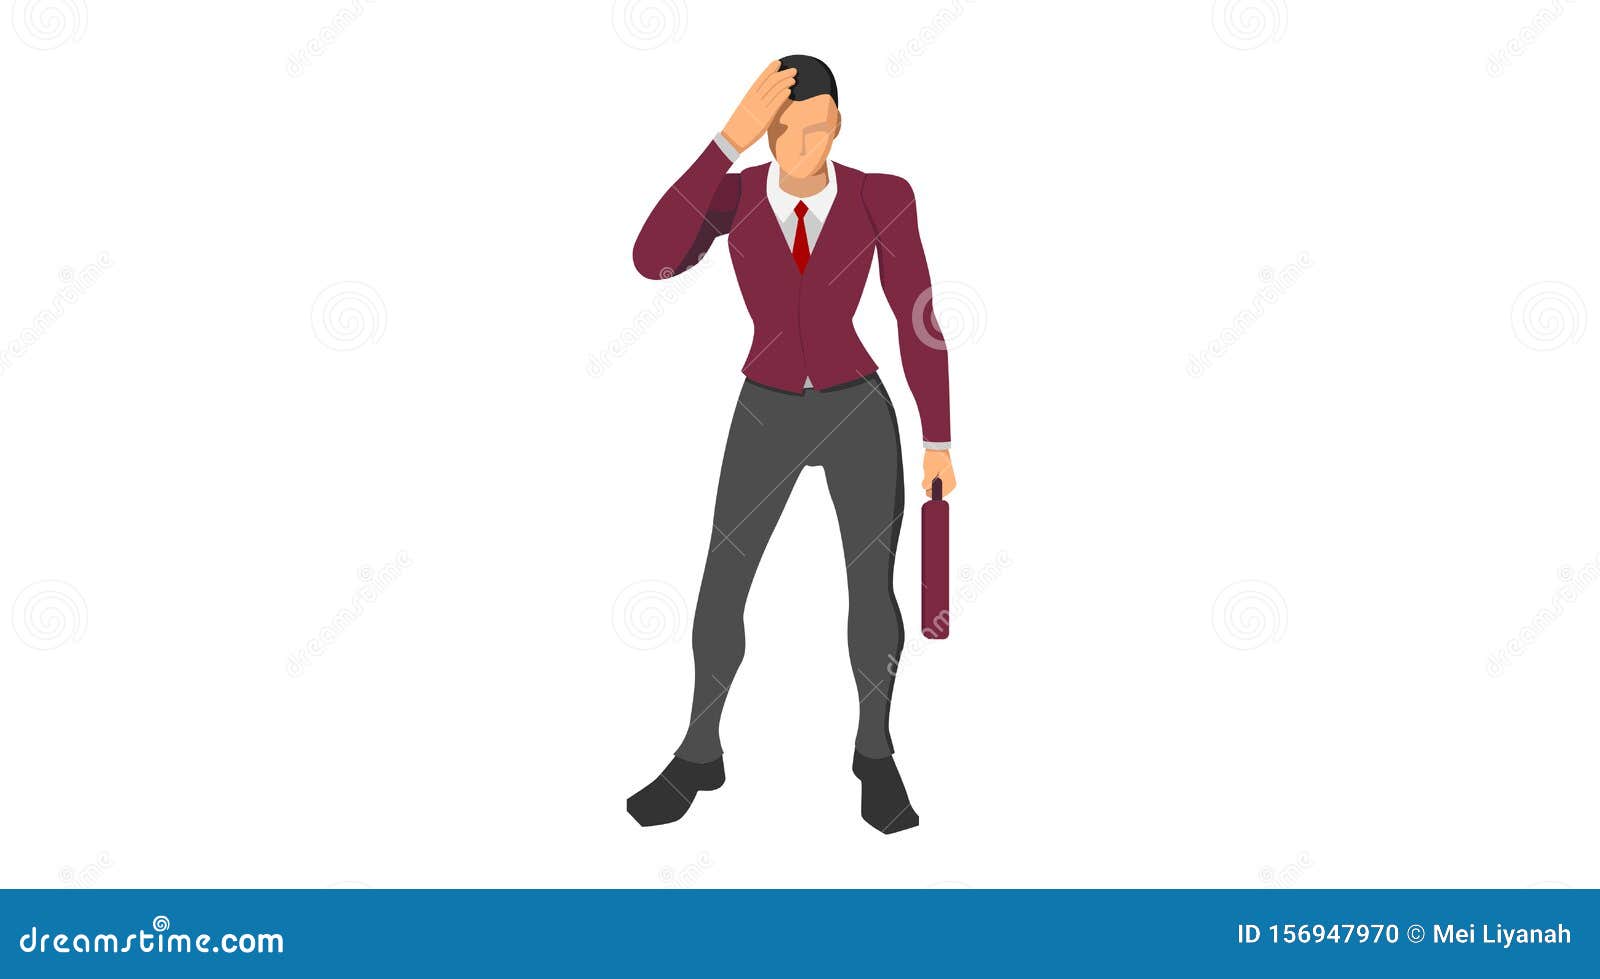 Characters Wearing Suits Stand Holding Their Heads. Body Gestures Indicate  Discrepancies, Errors and Bankruptcies Stock Vector - Illustration of  entrepreneurs, cartoon: 156947970